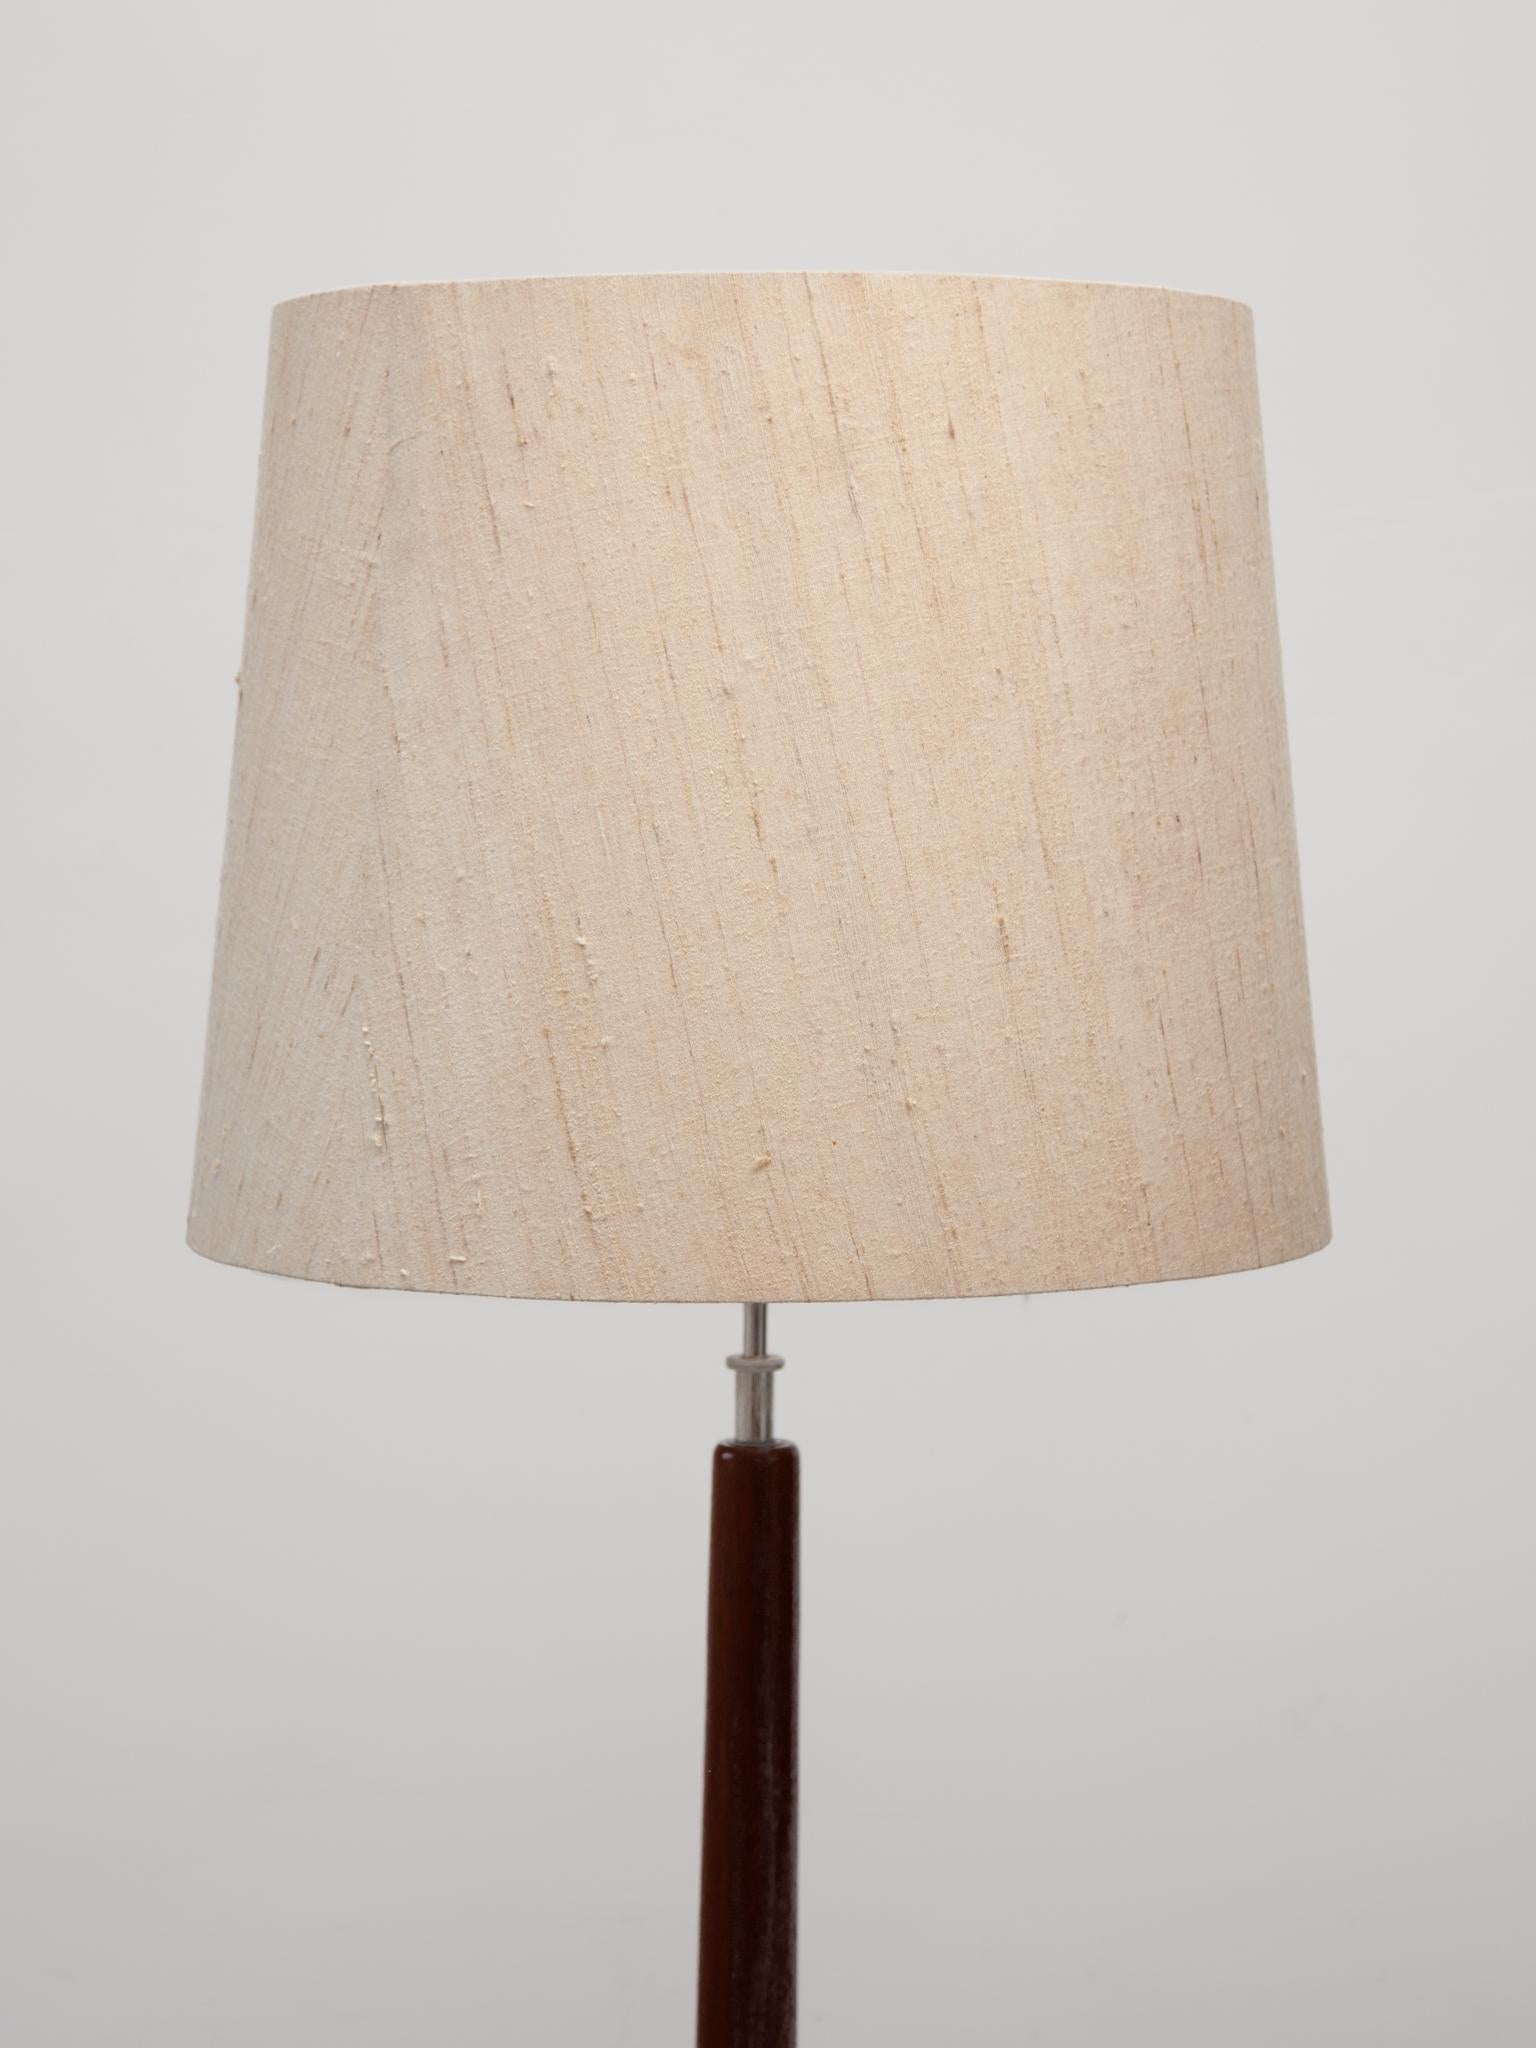 Midcentury Modern minimalist floor lamp manufactured by Domus during the 1960s. It features a stem and base made from solid teak wood, with a beautiful wood grain in a very warm tone.Three light sources can be switched separately: There are two